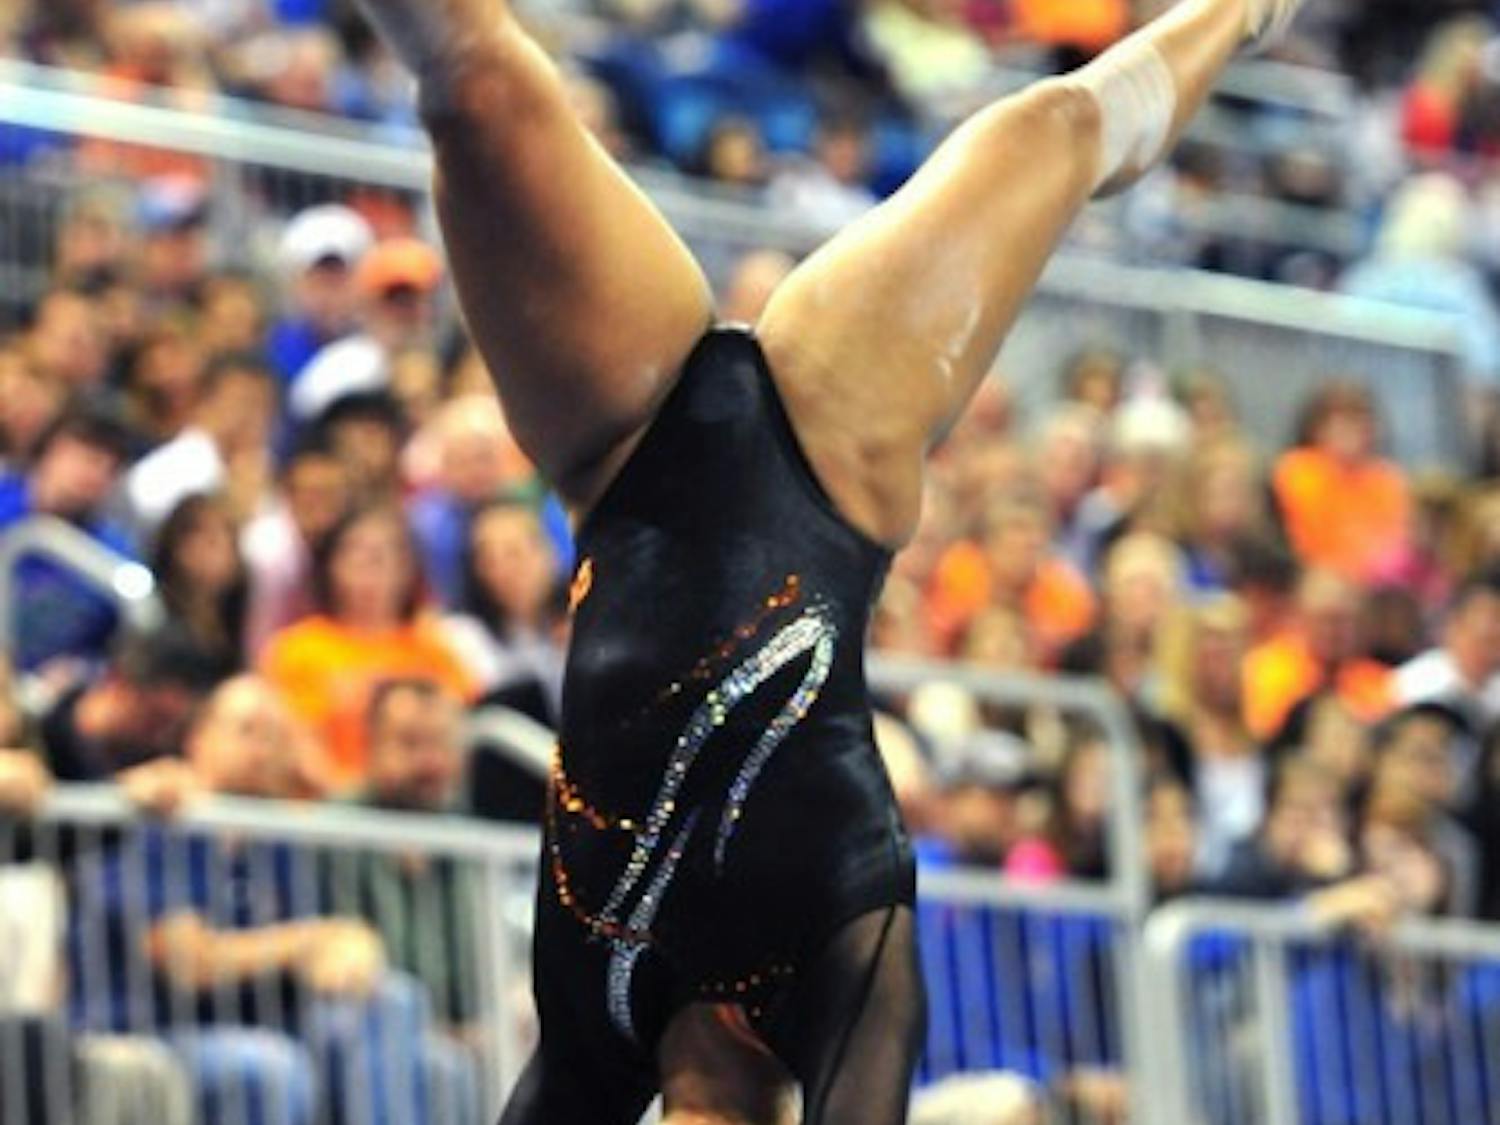 Florida sophomore gymnast Kytra Hunter works on the balance beam during a meet last season. Hunter matched a career-best of 9.90 on the uneven bars against Ball State on Friday at the Stephen C. O'Connell Center. Florida recorded its third-highest team score ever in season openers.